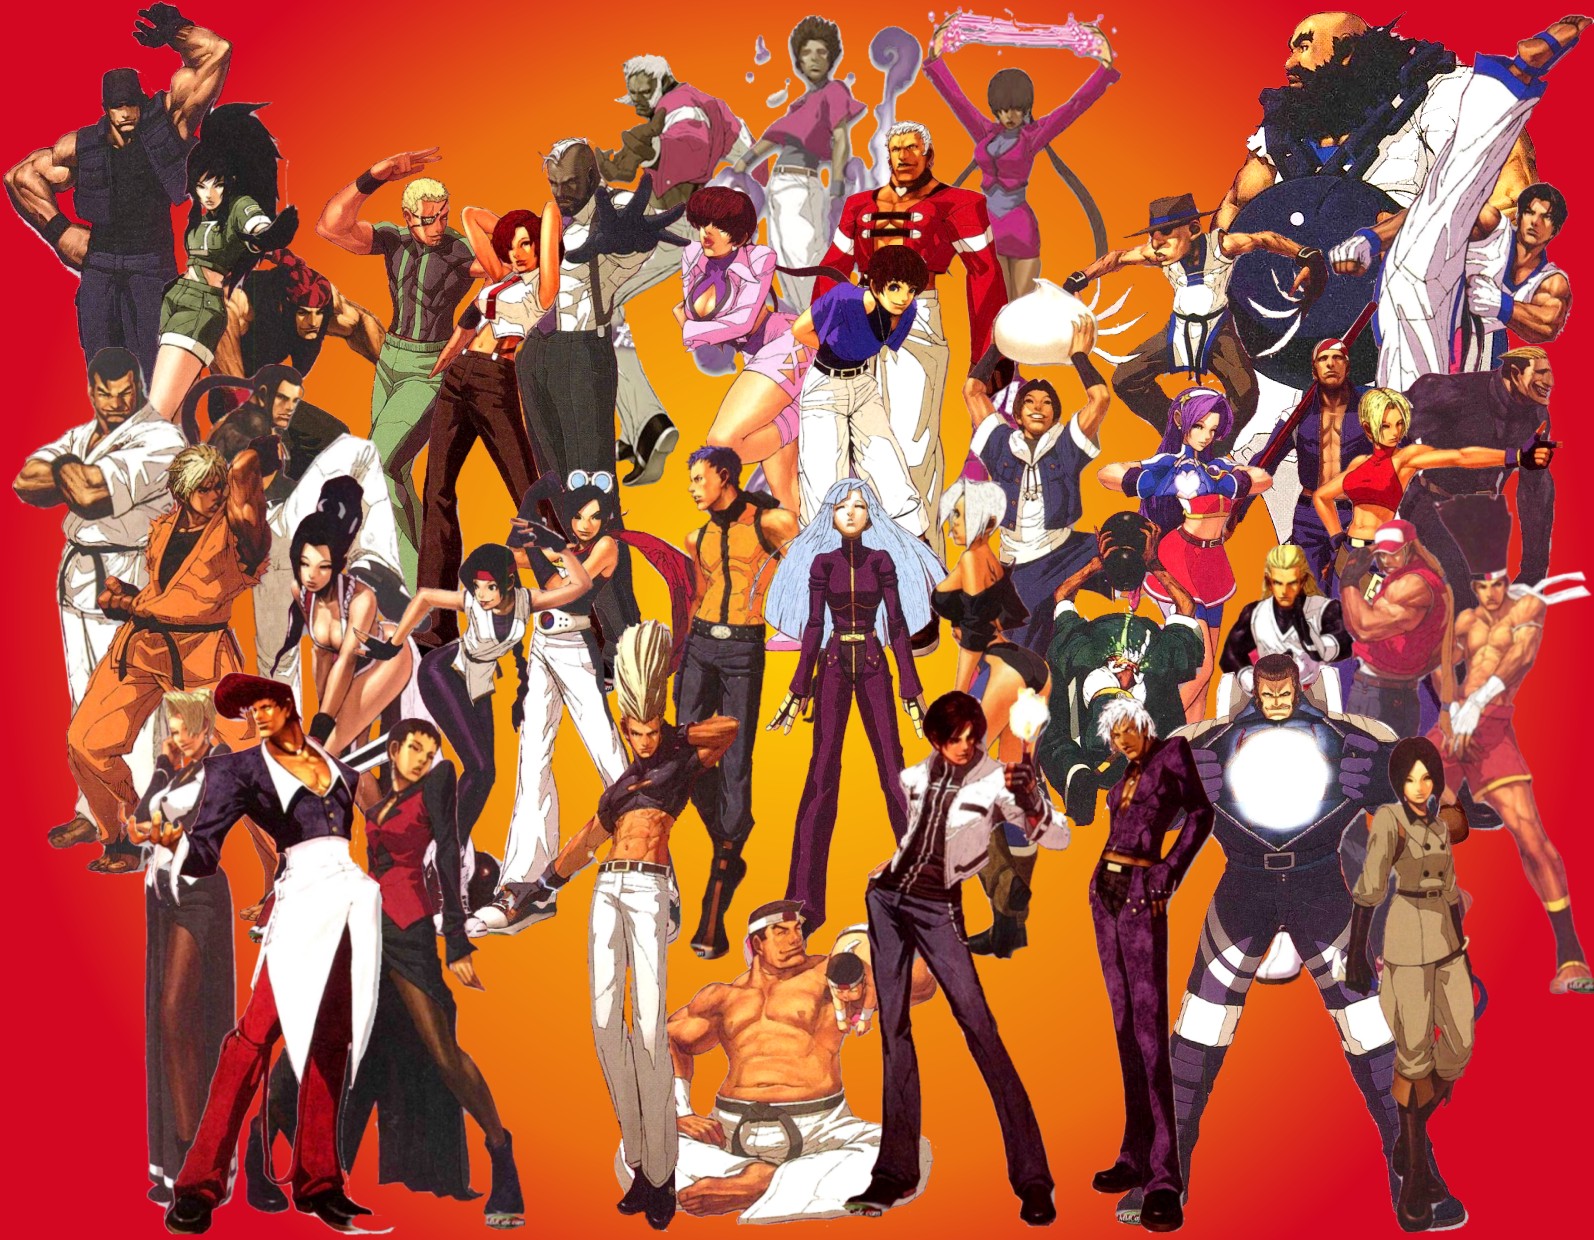 Wallpapers de The King of Fighters   Taringa 1594x1240